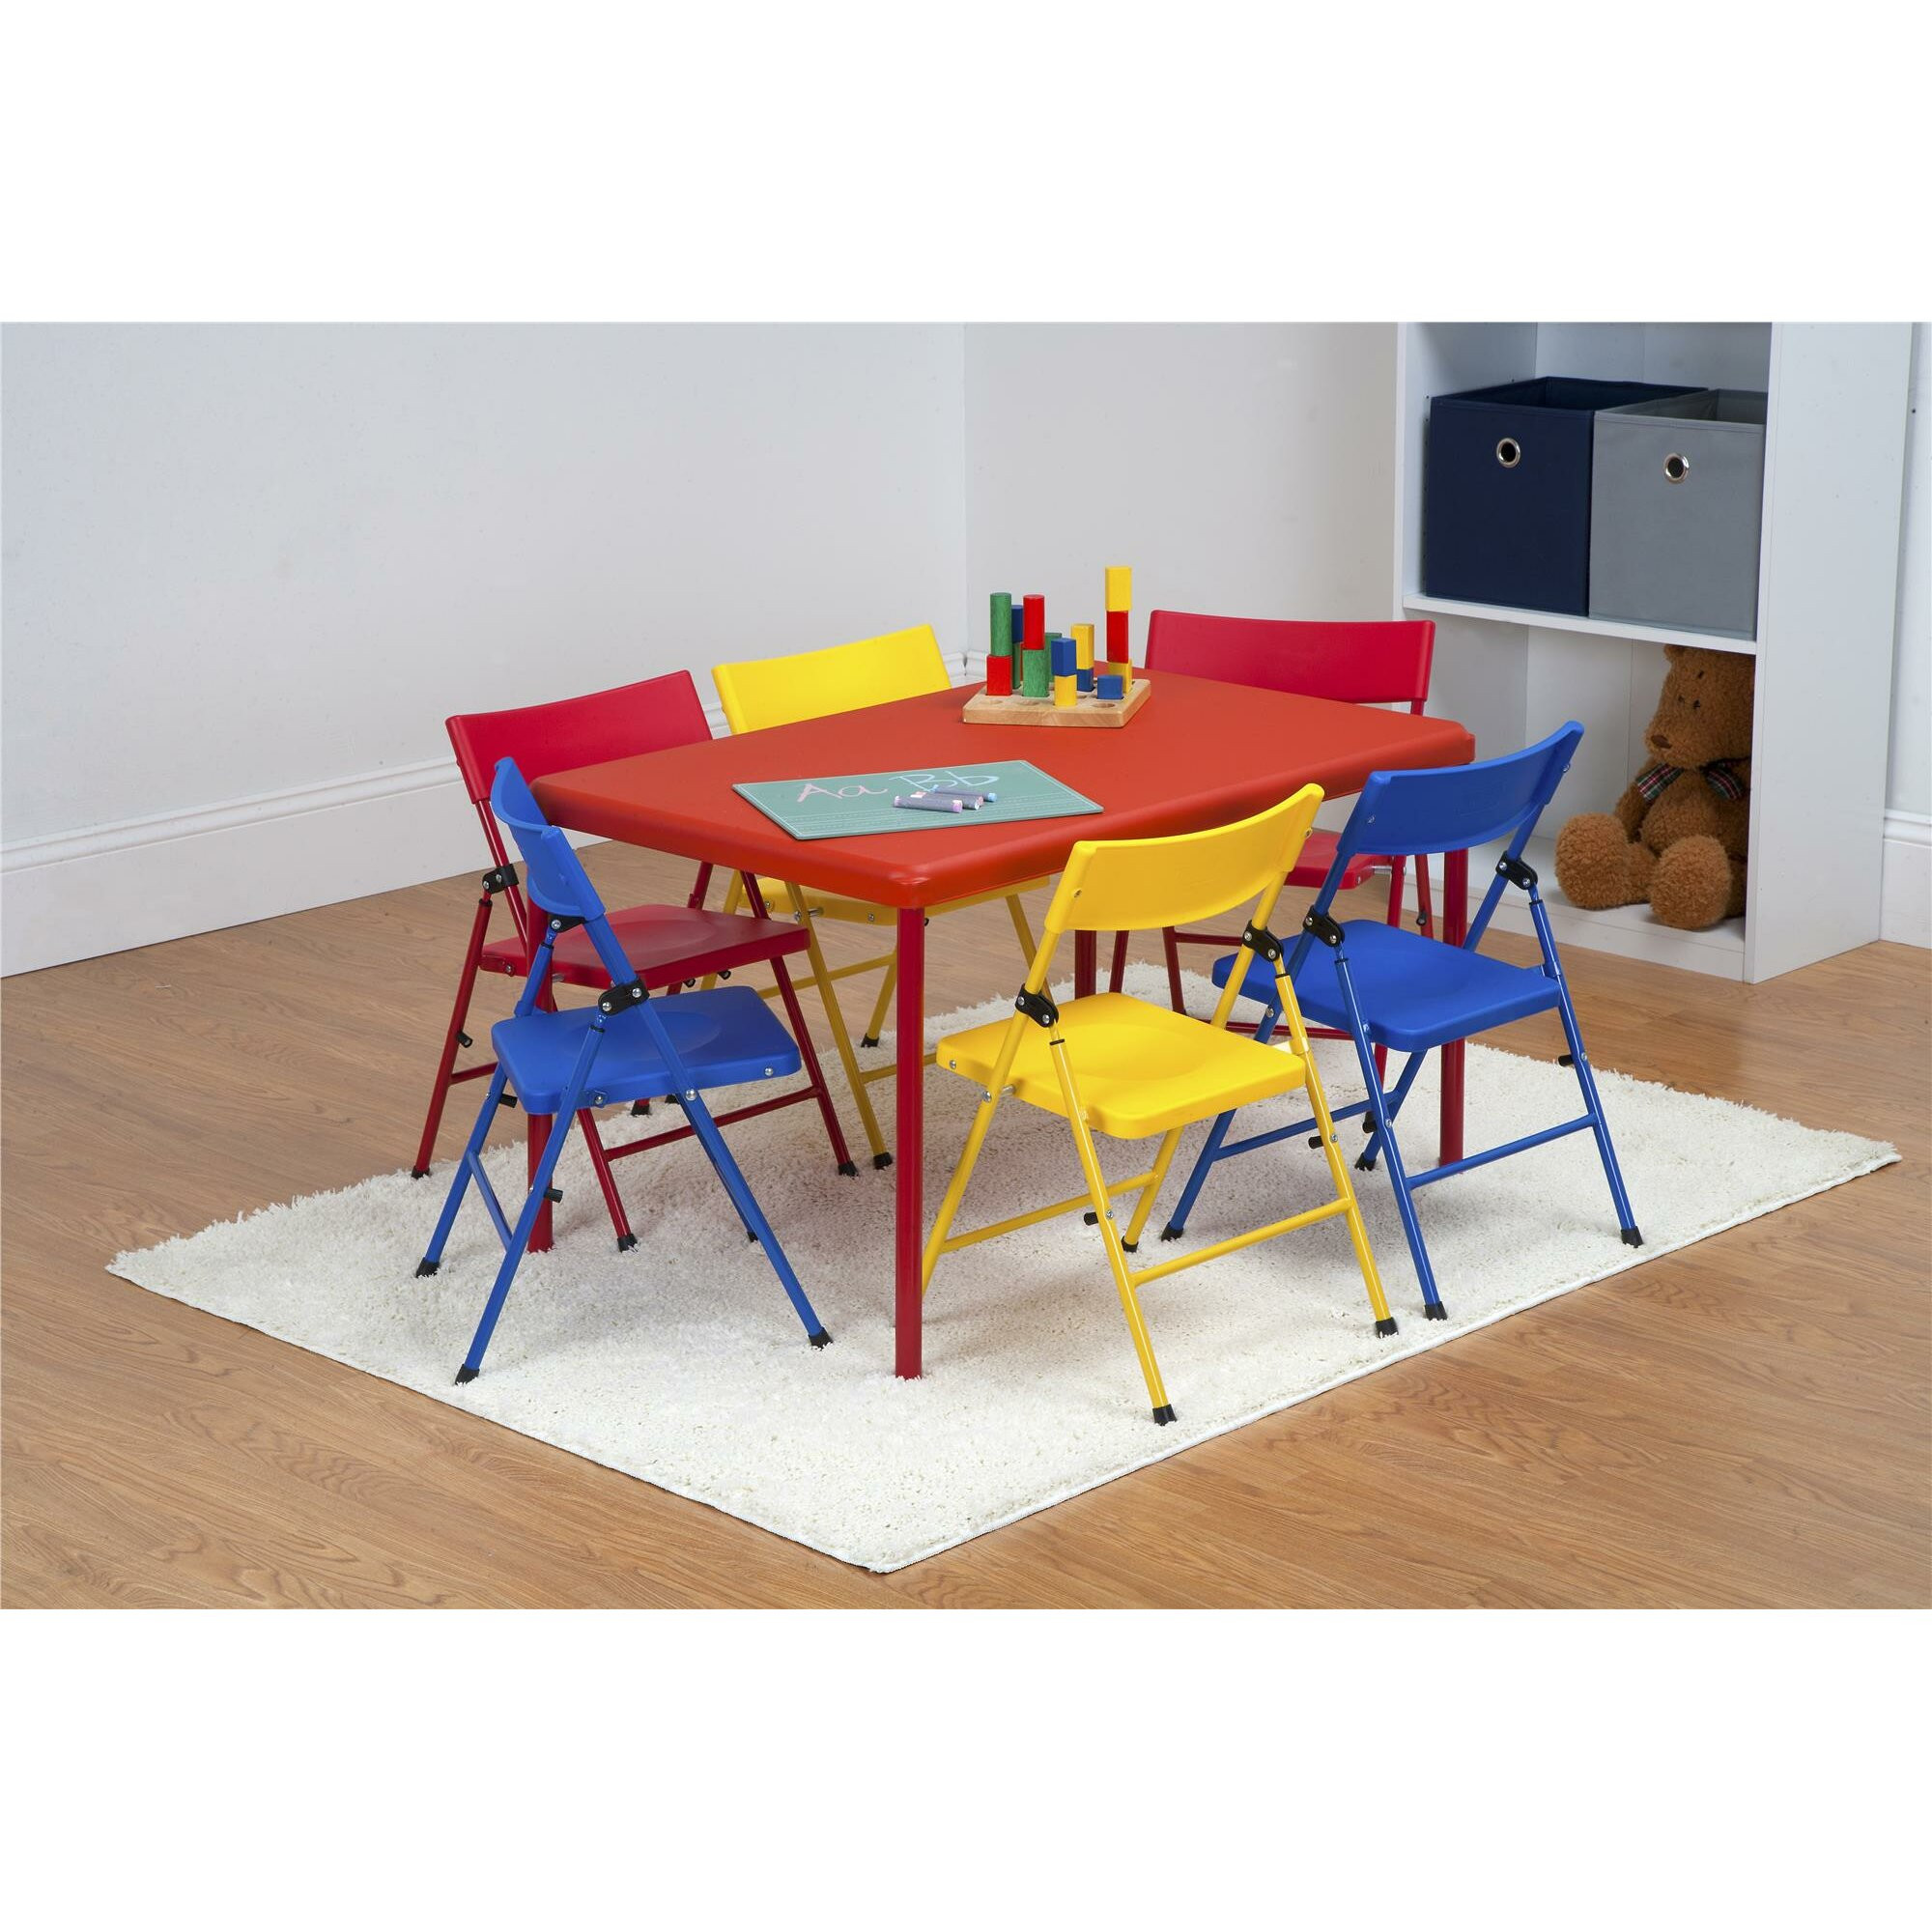 Kids Table And Chairs
 Zoomie Kids Adrian Kids 7 Piece Rectangular Table and